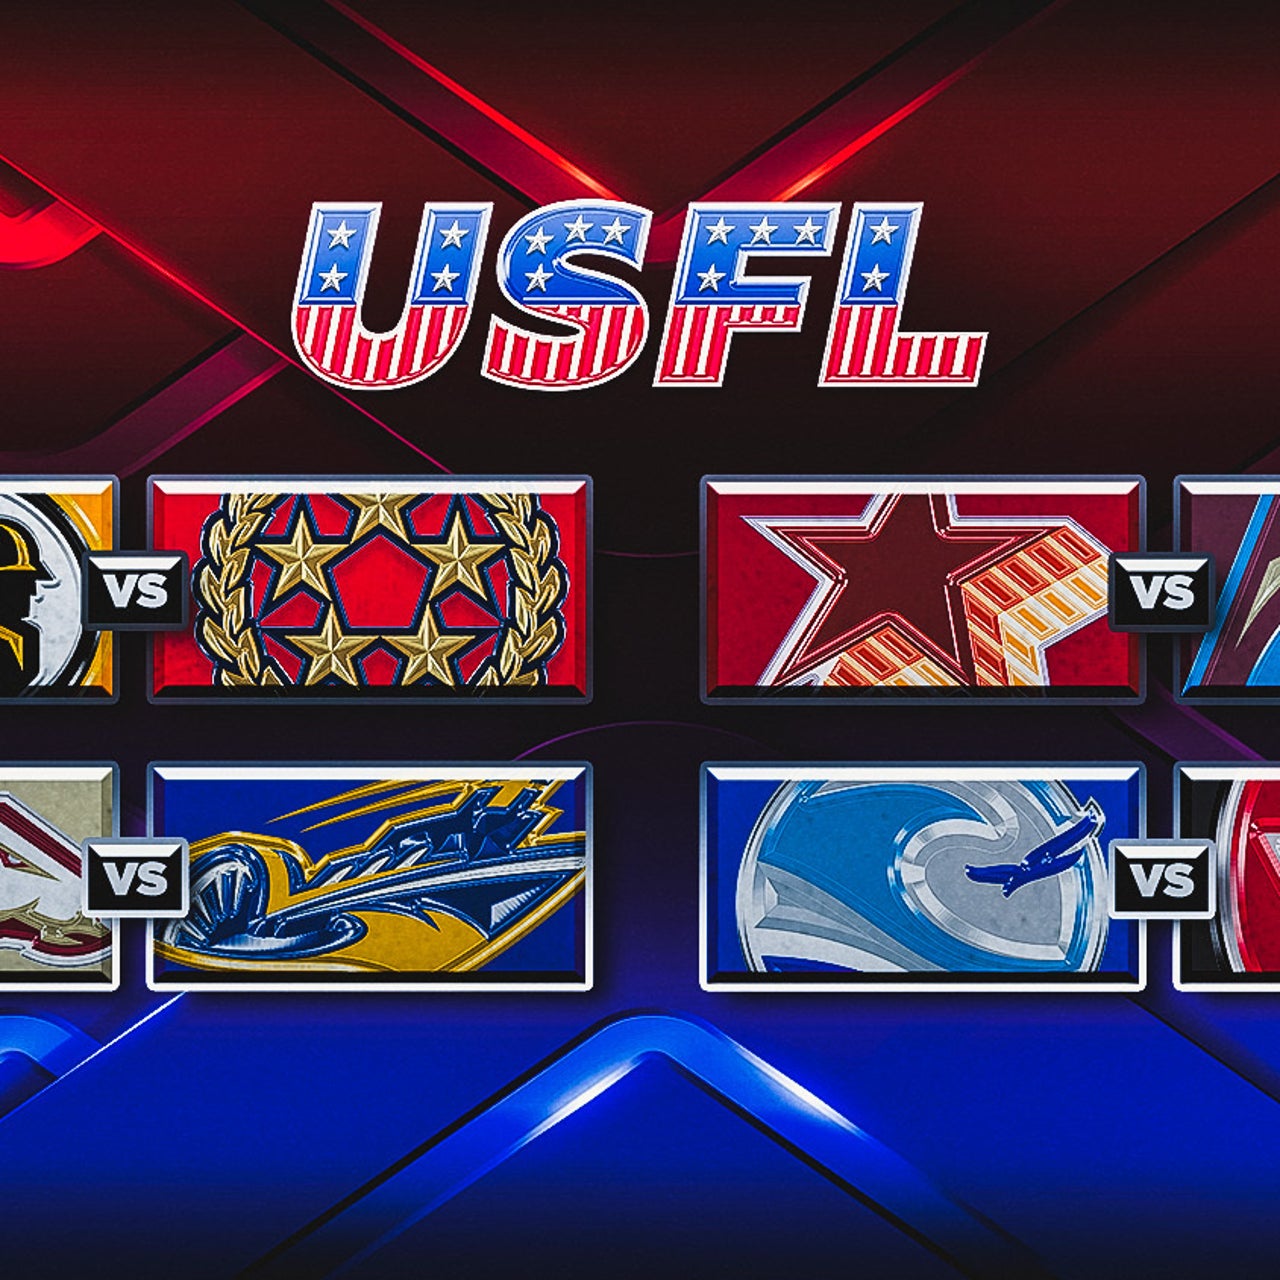 XFL Playoffs Picture Heading Into Week 10